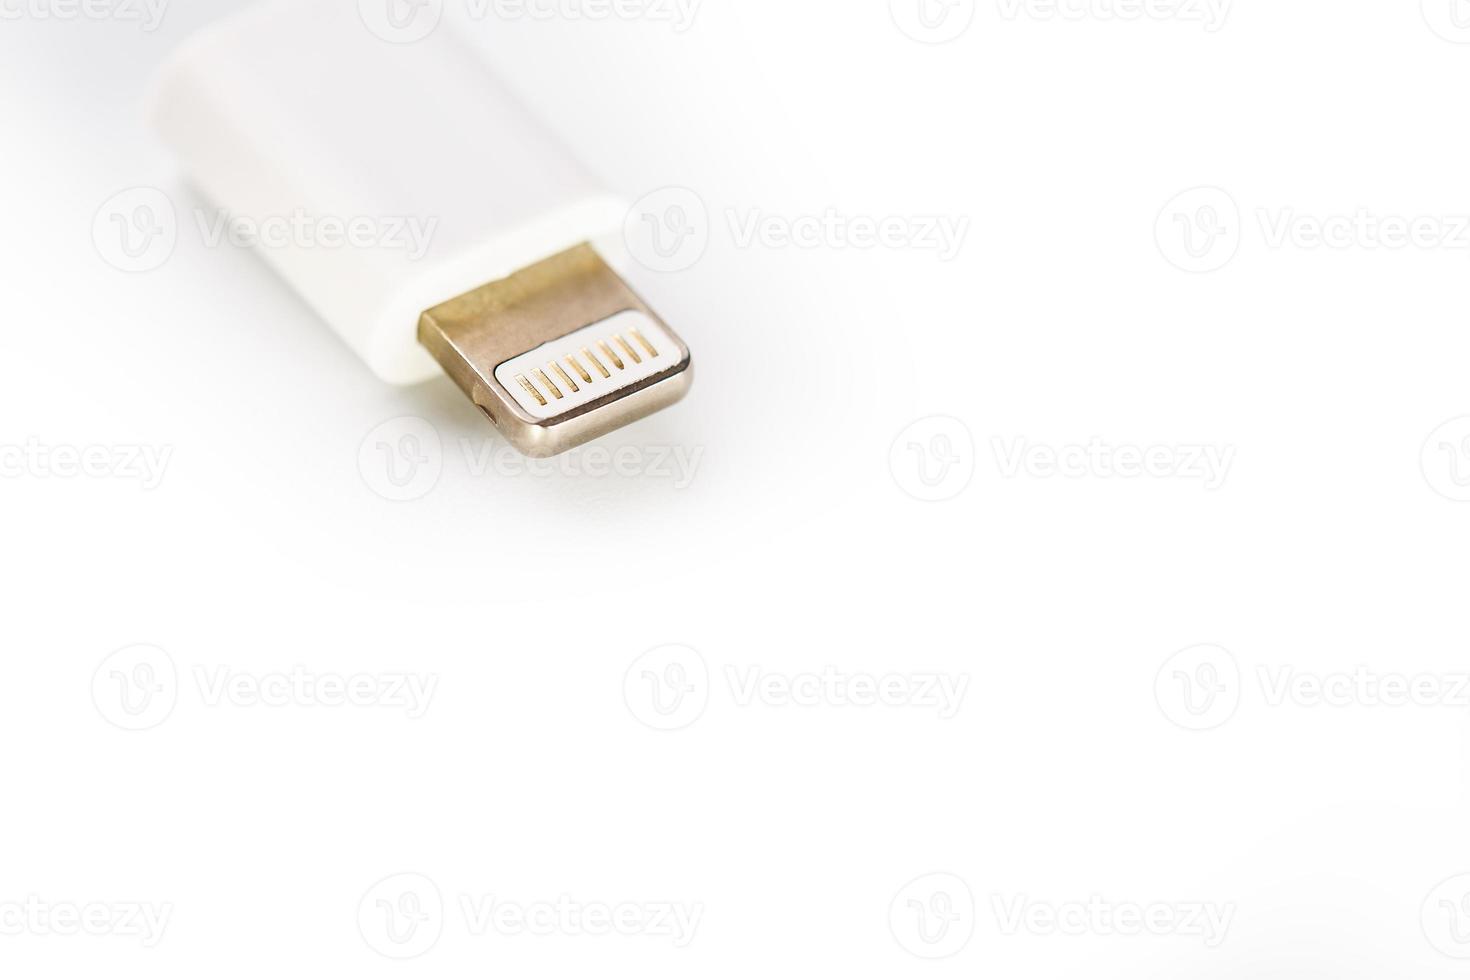 Connector lightning on a white background. This is a proprietary connector used to connect mobile devices to well-known host computers photo